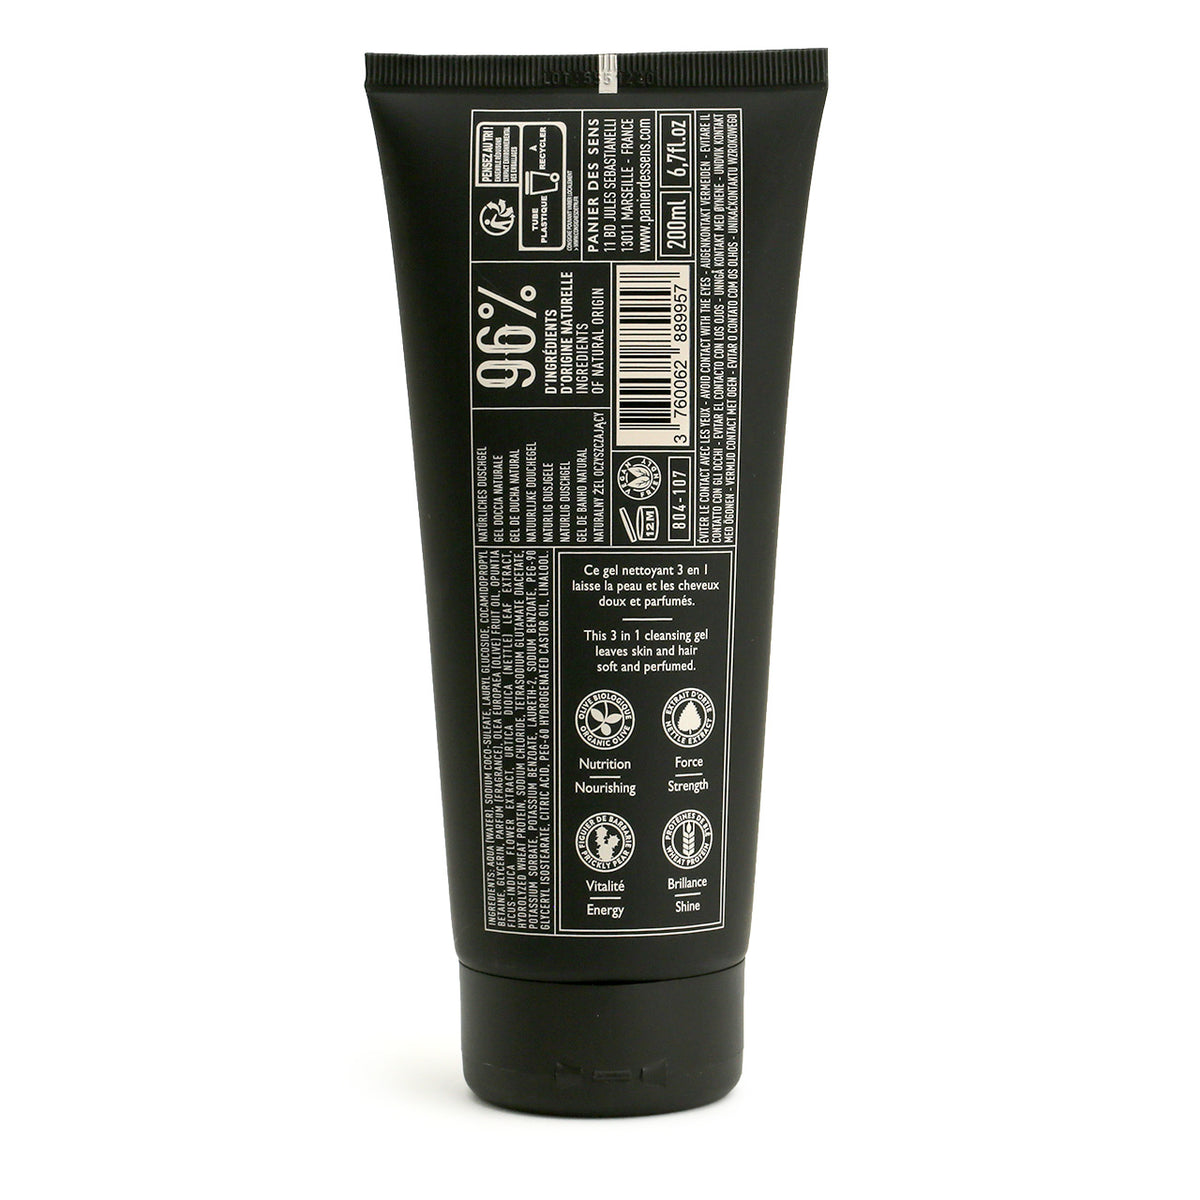 back of the tube of cleansing gel showing the specifications - 96% ingredients of natural origin